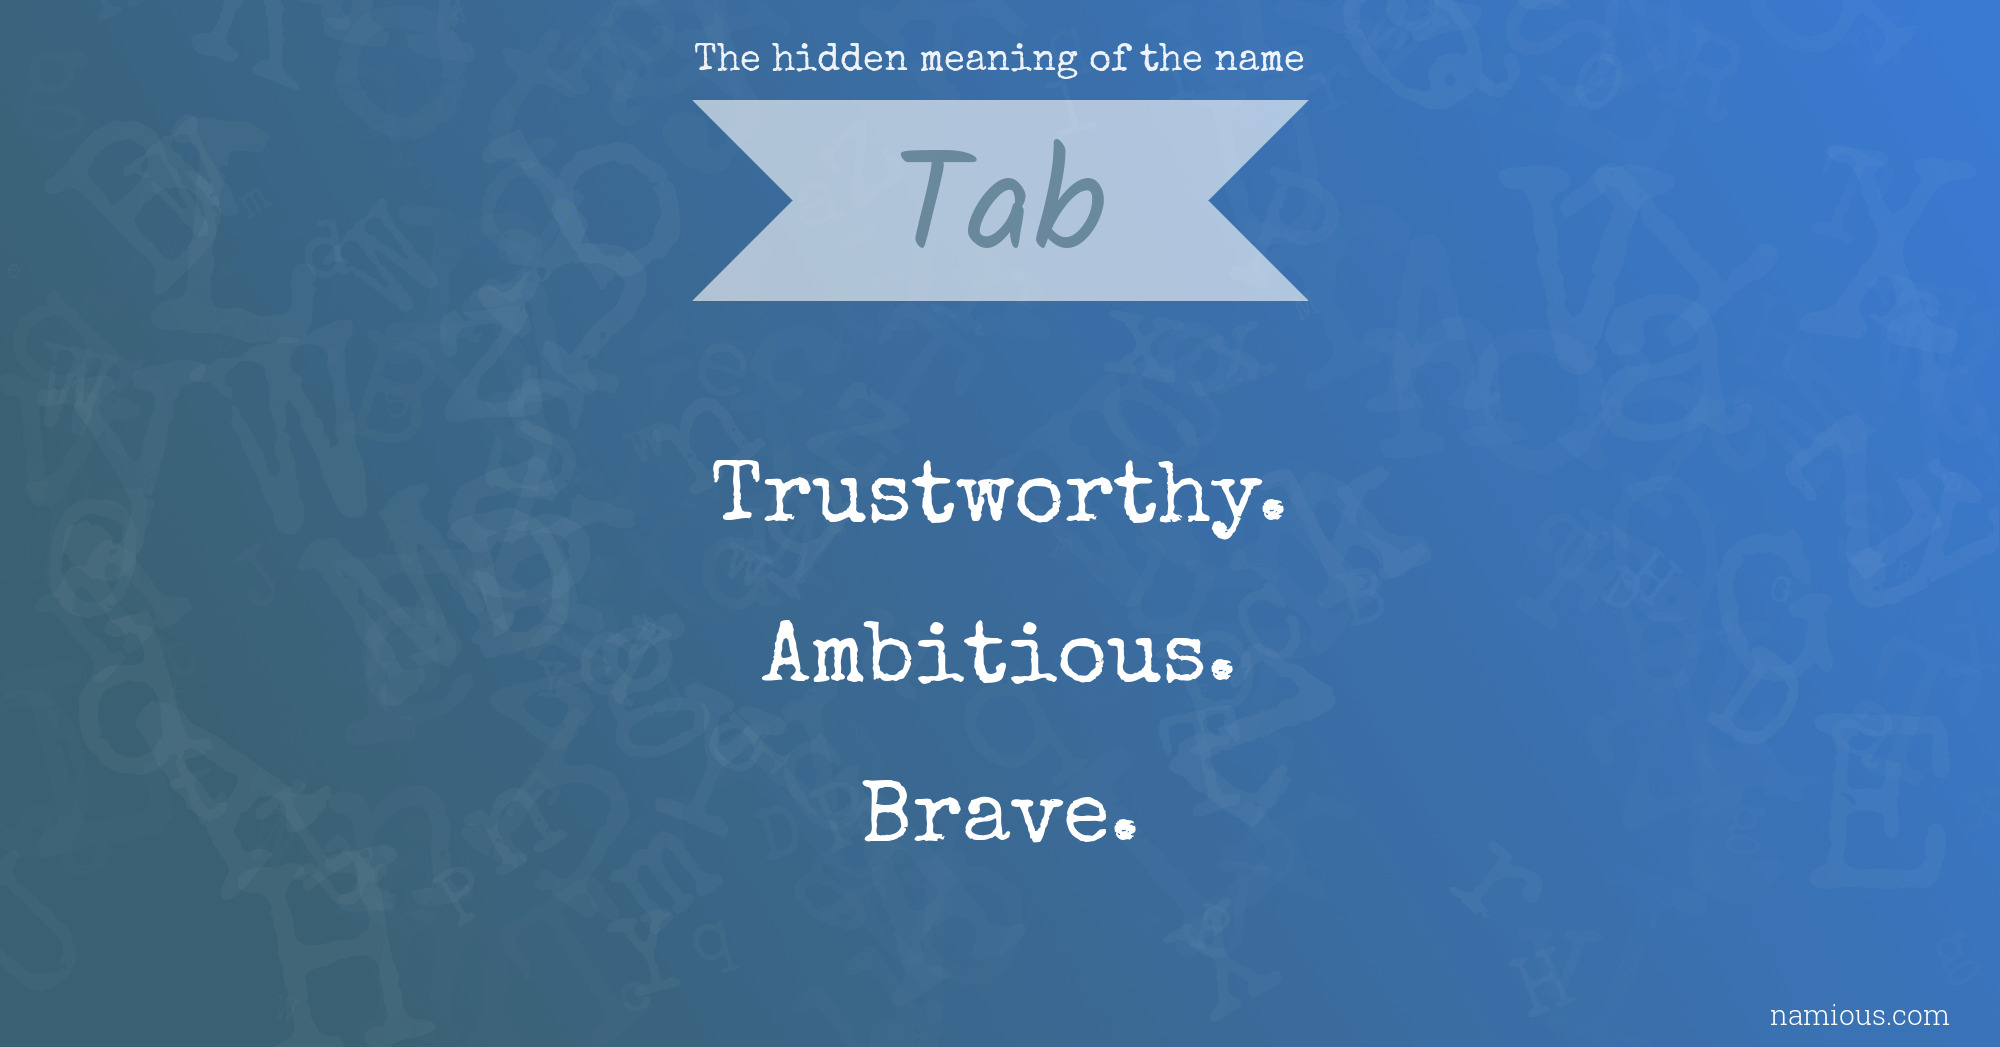 The hidden meaning of the name Tab